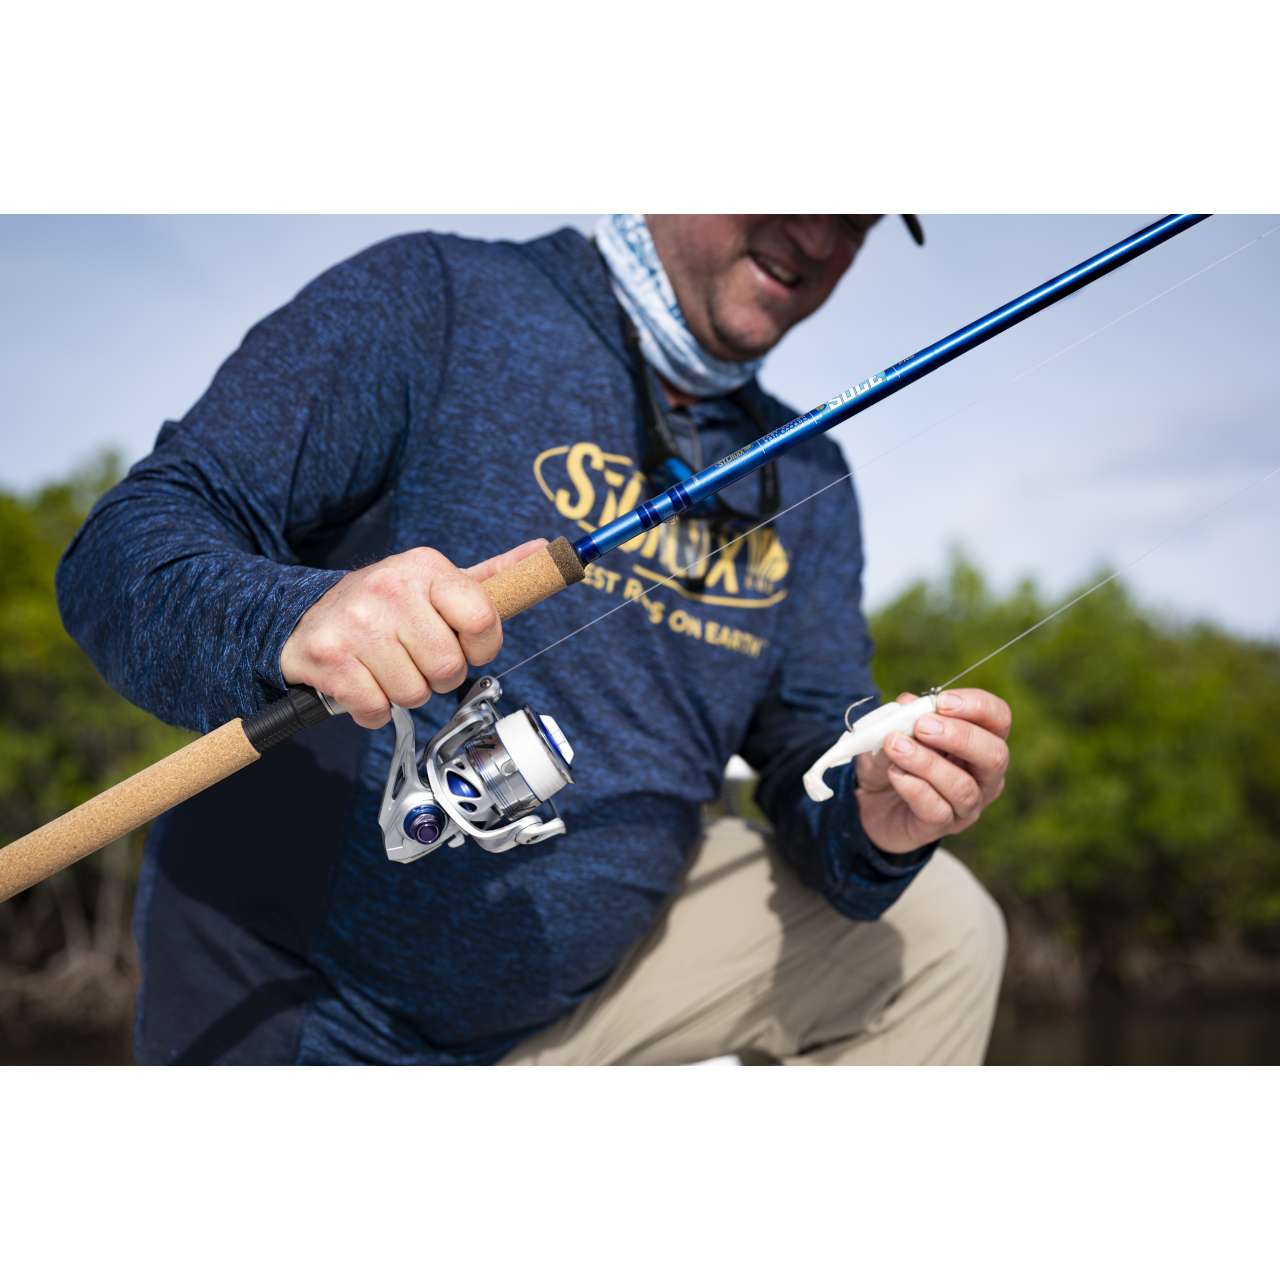 saltwater fishing rod and reel combo used